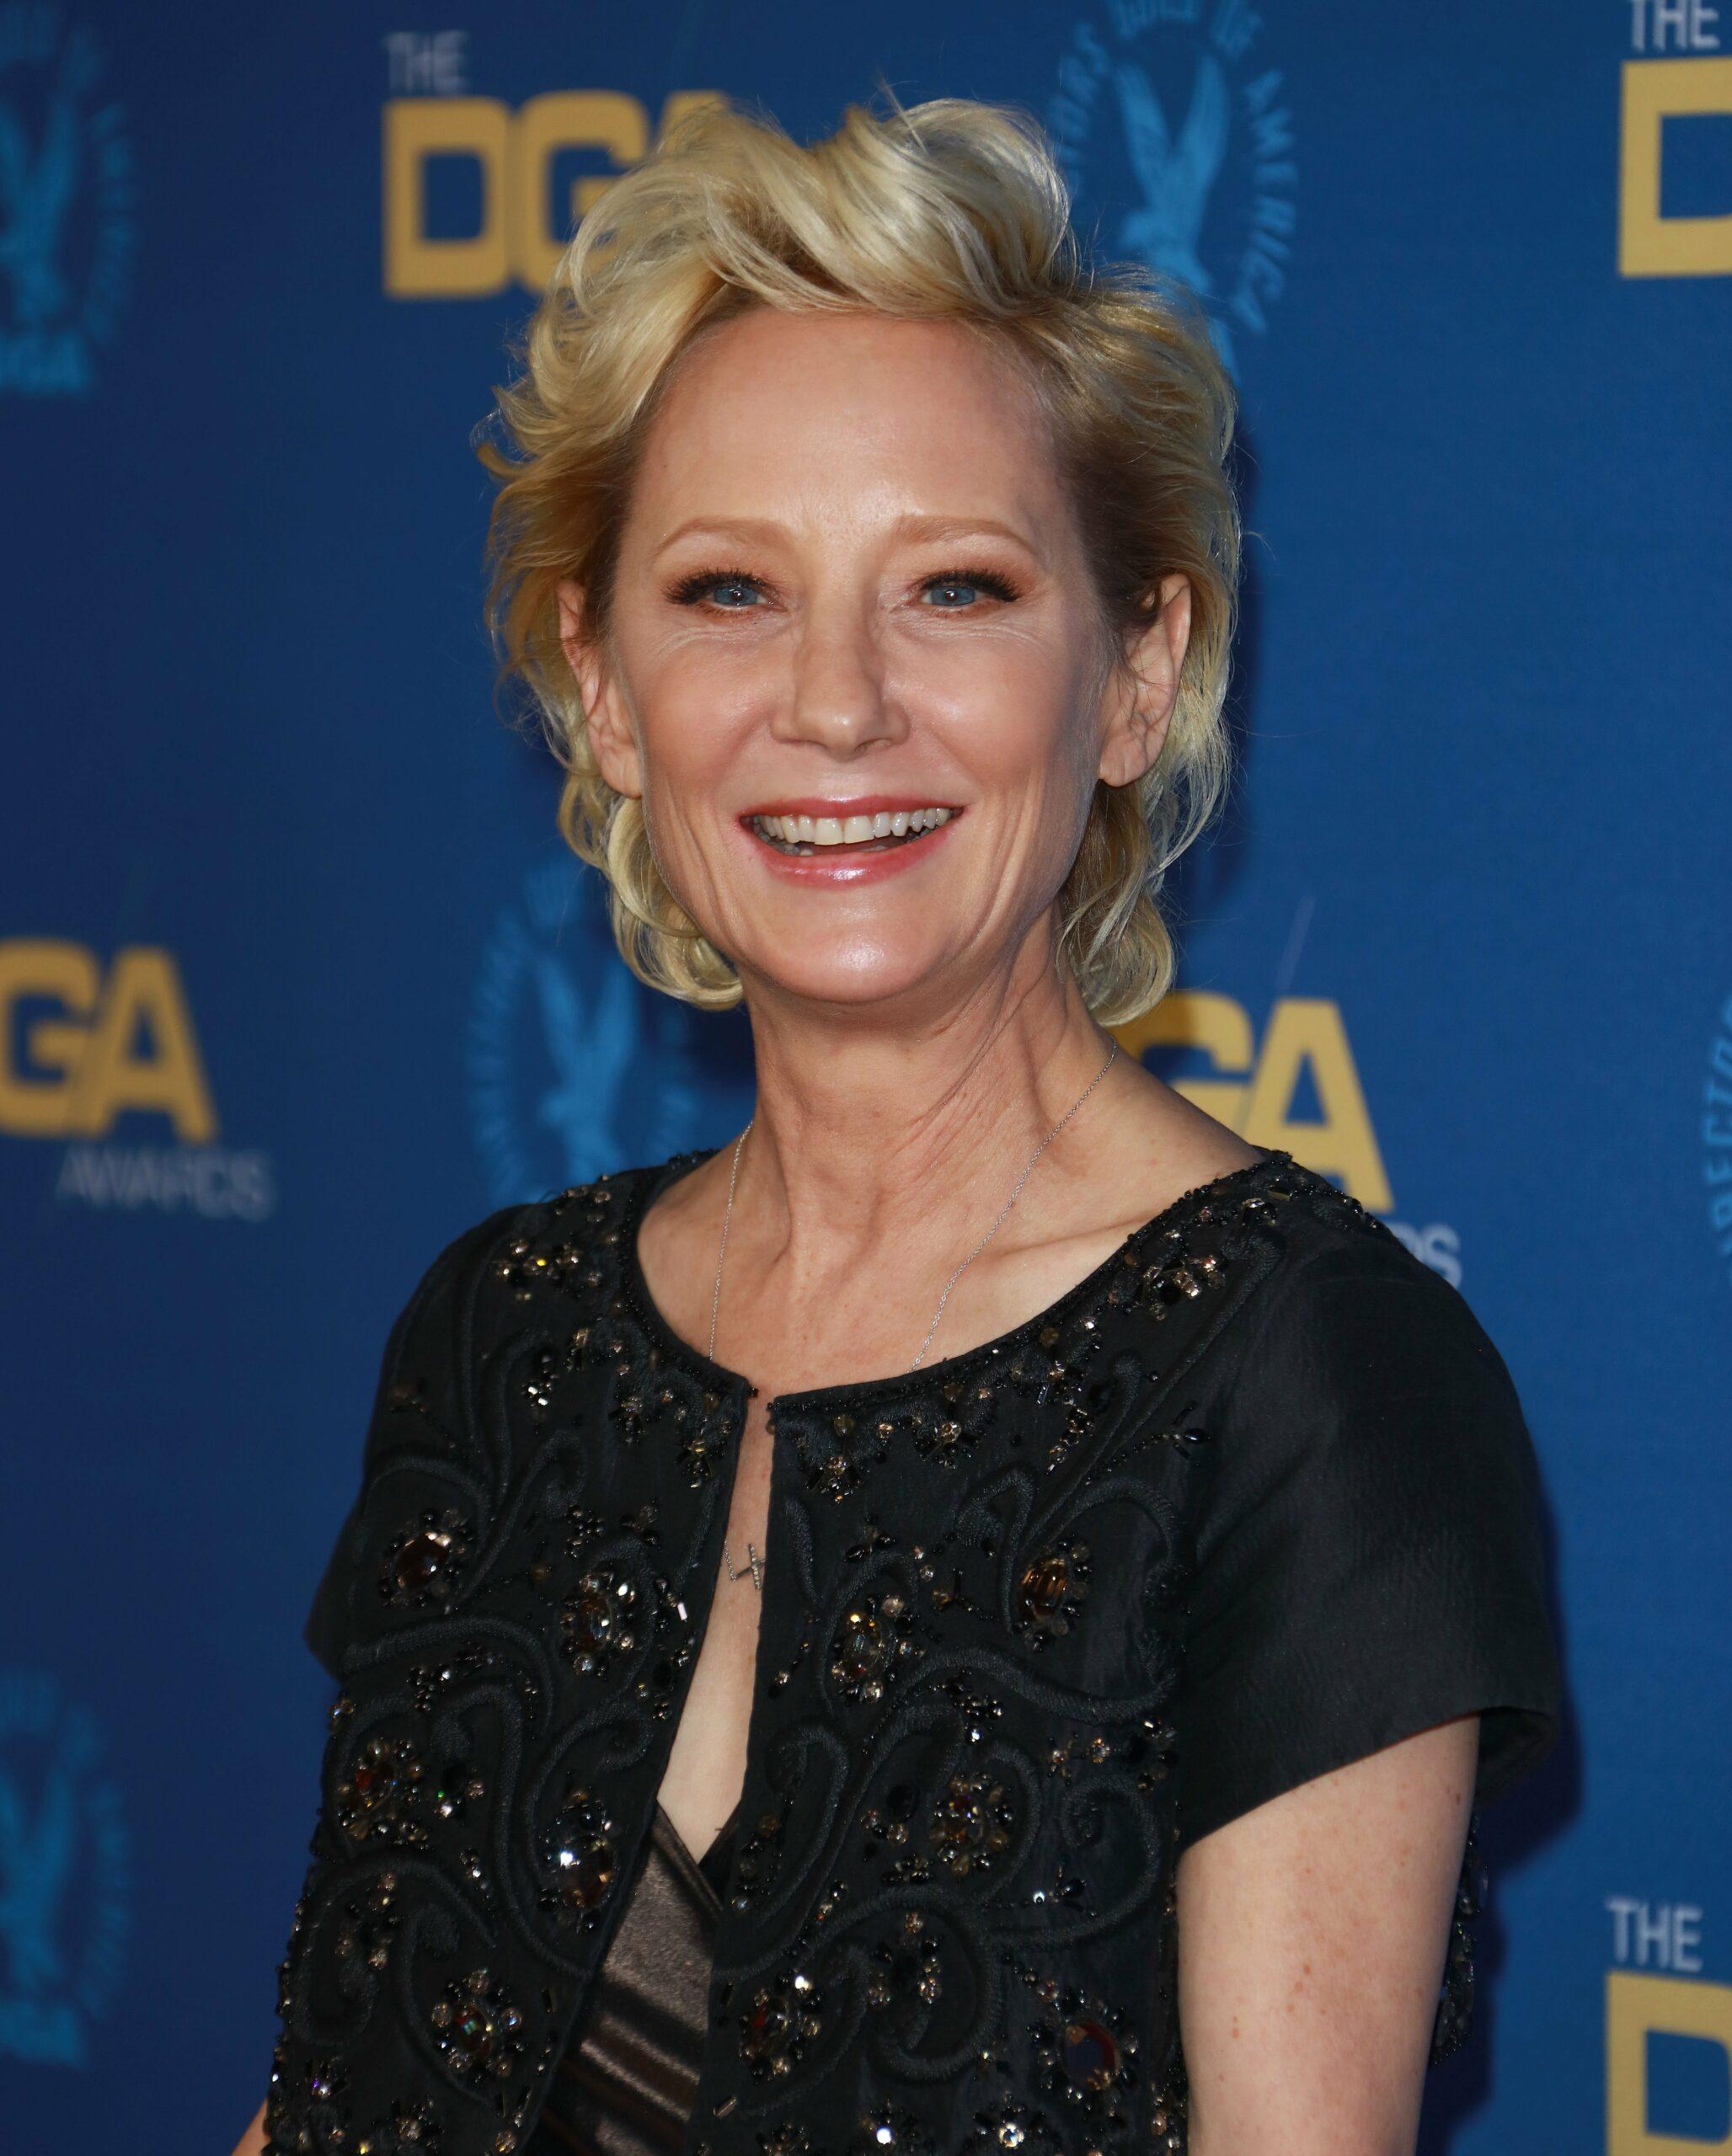 Anne Heche at The 74th Annual DGA Awards in Los Angeles